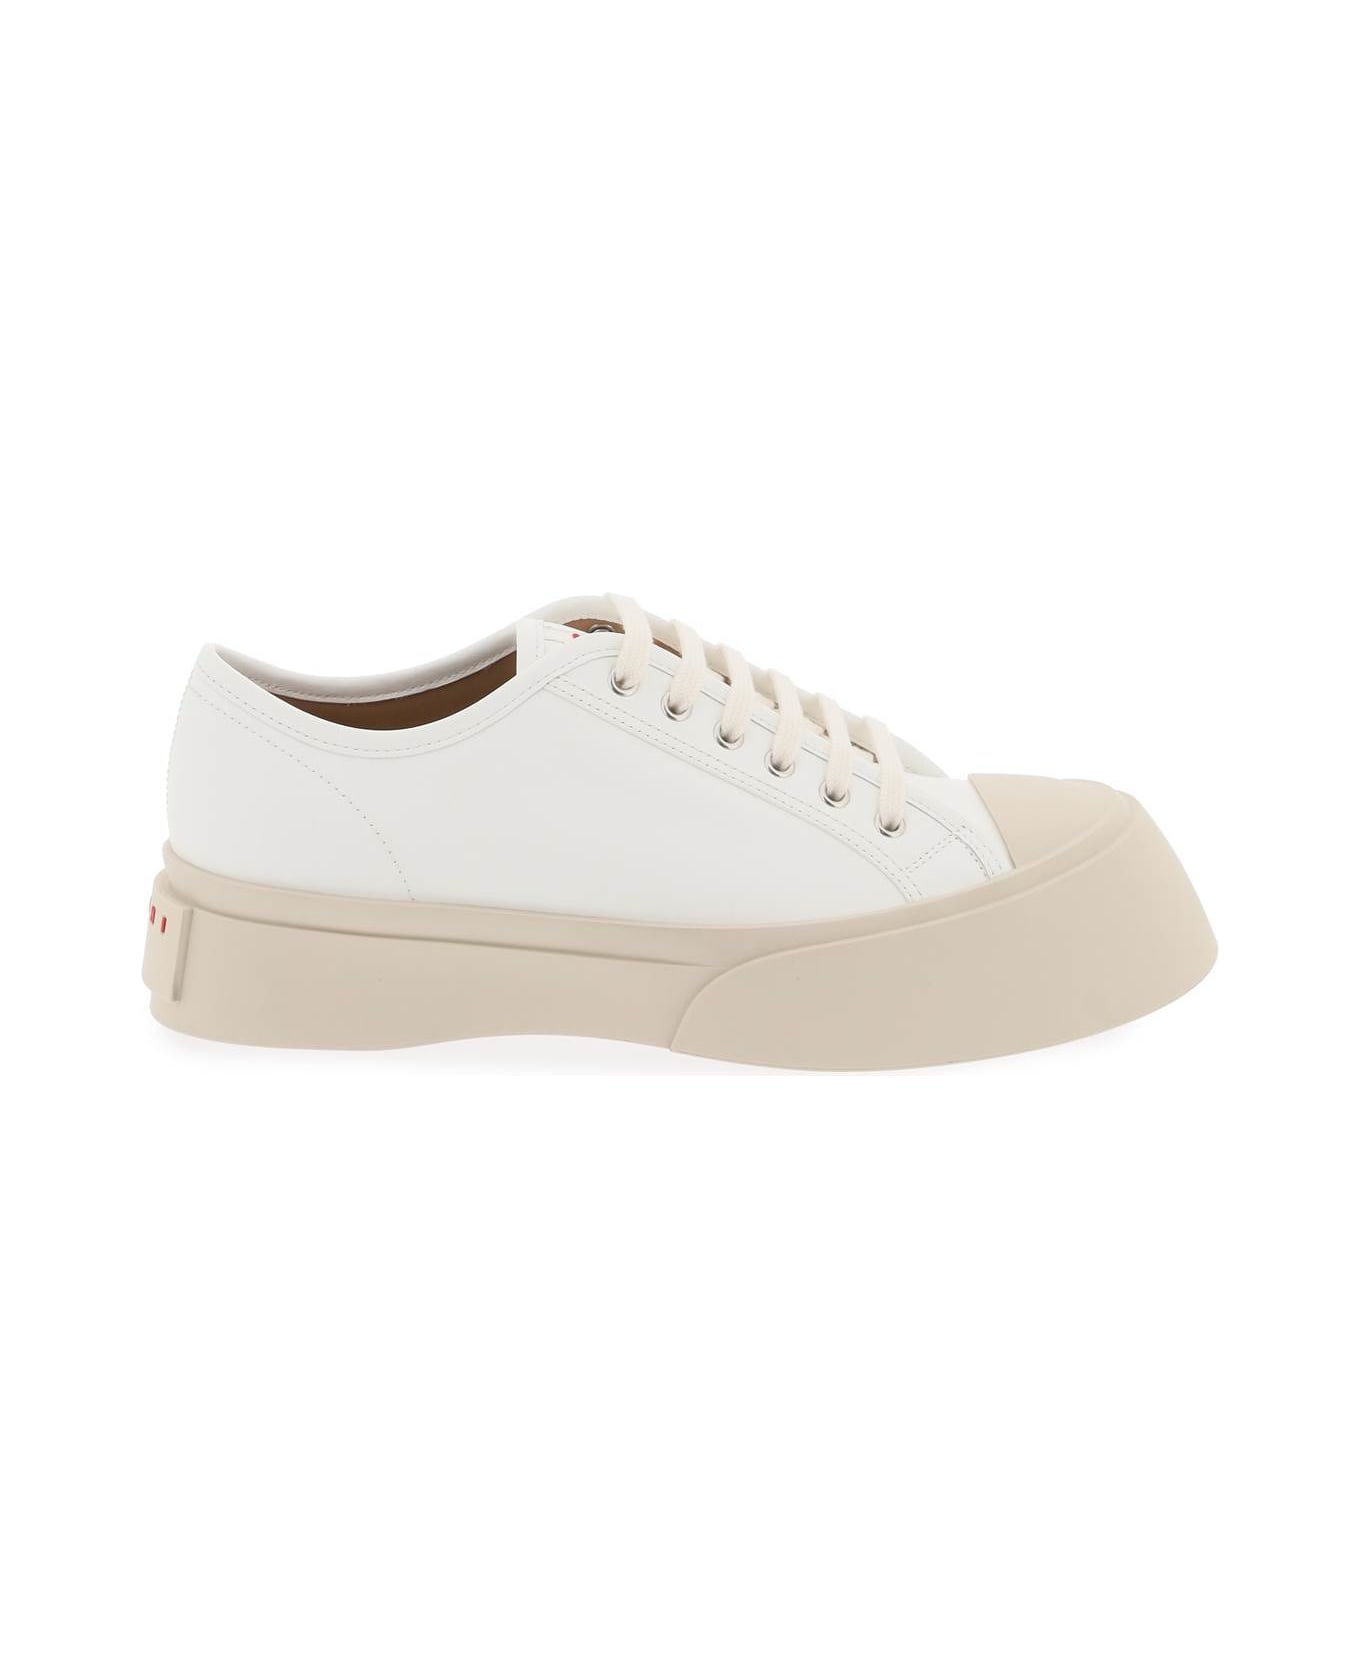 Marni Leather Pablo Sneakers - LILY WHITE (White)